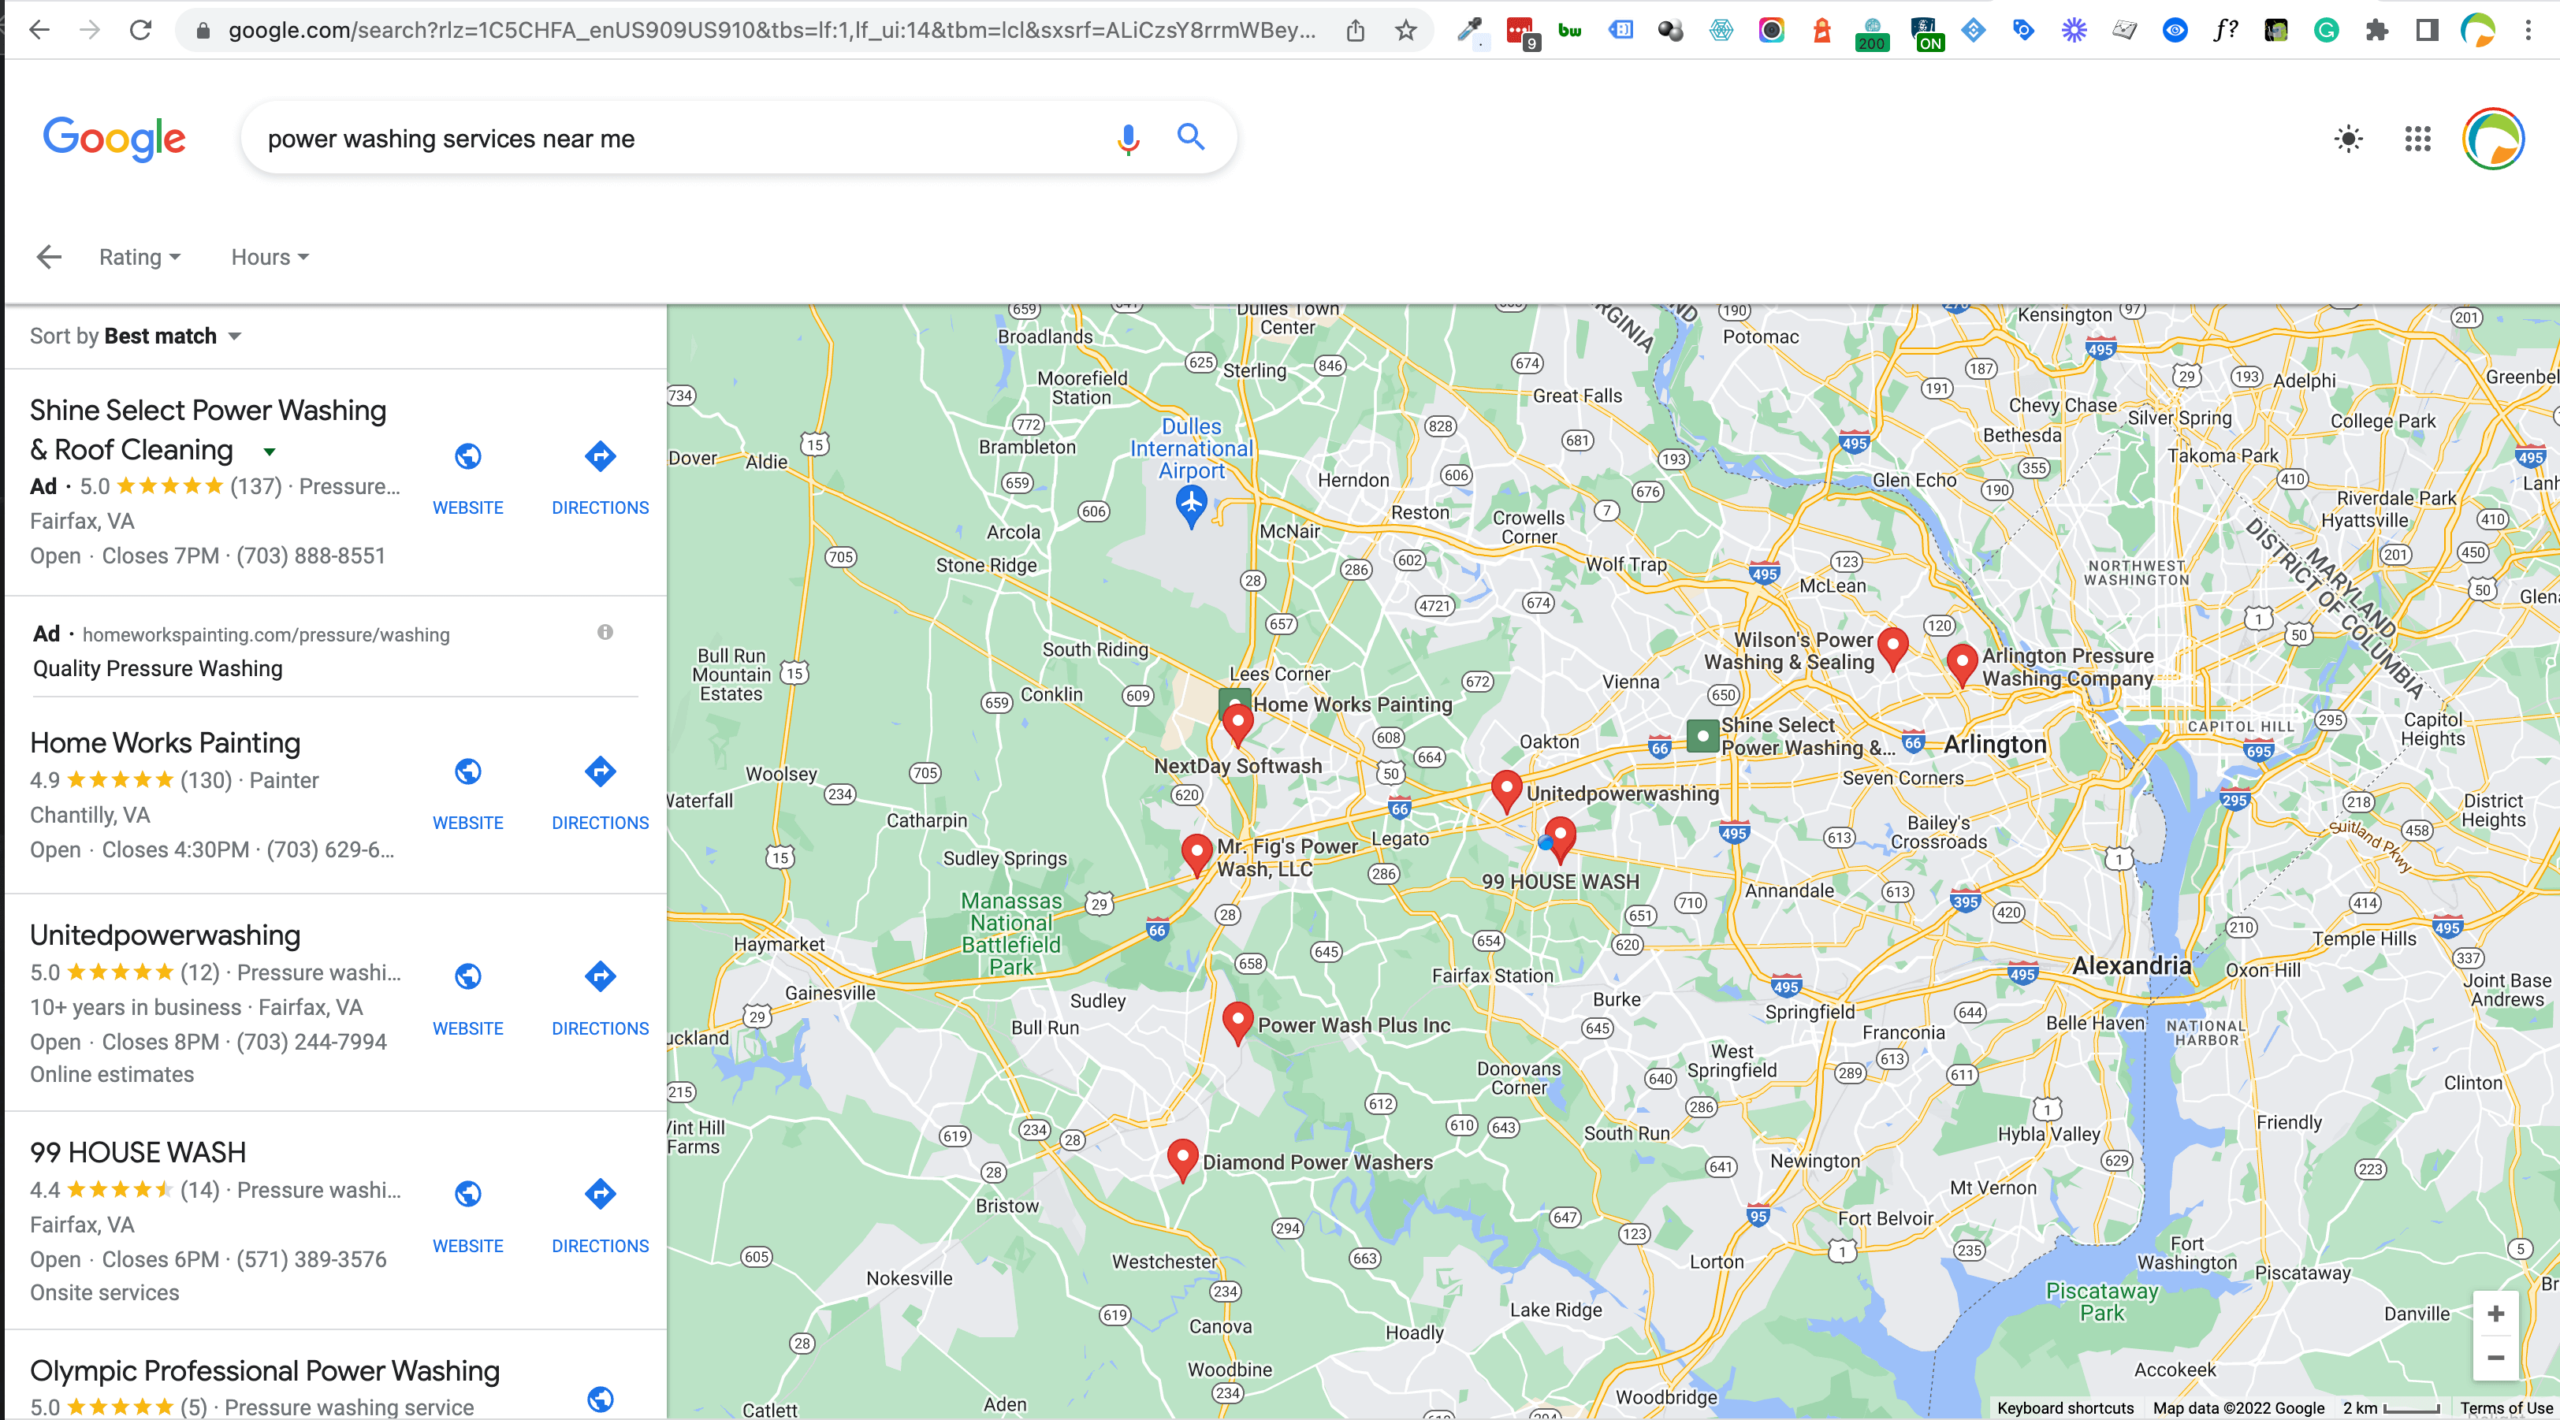 Google map result for power washing services near me